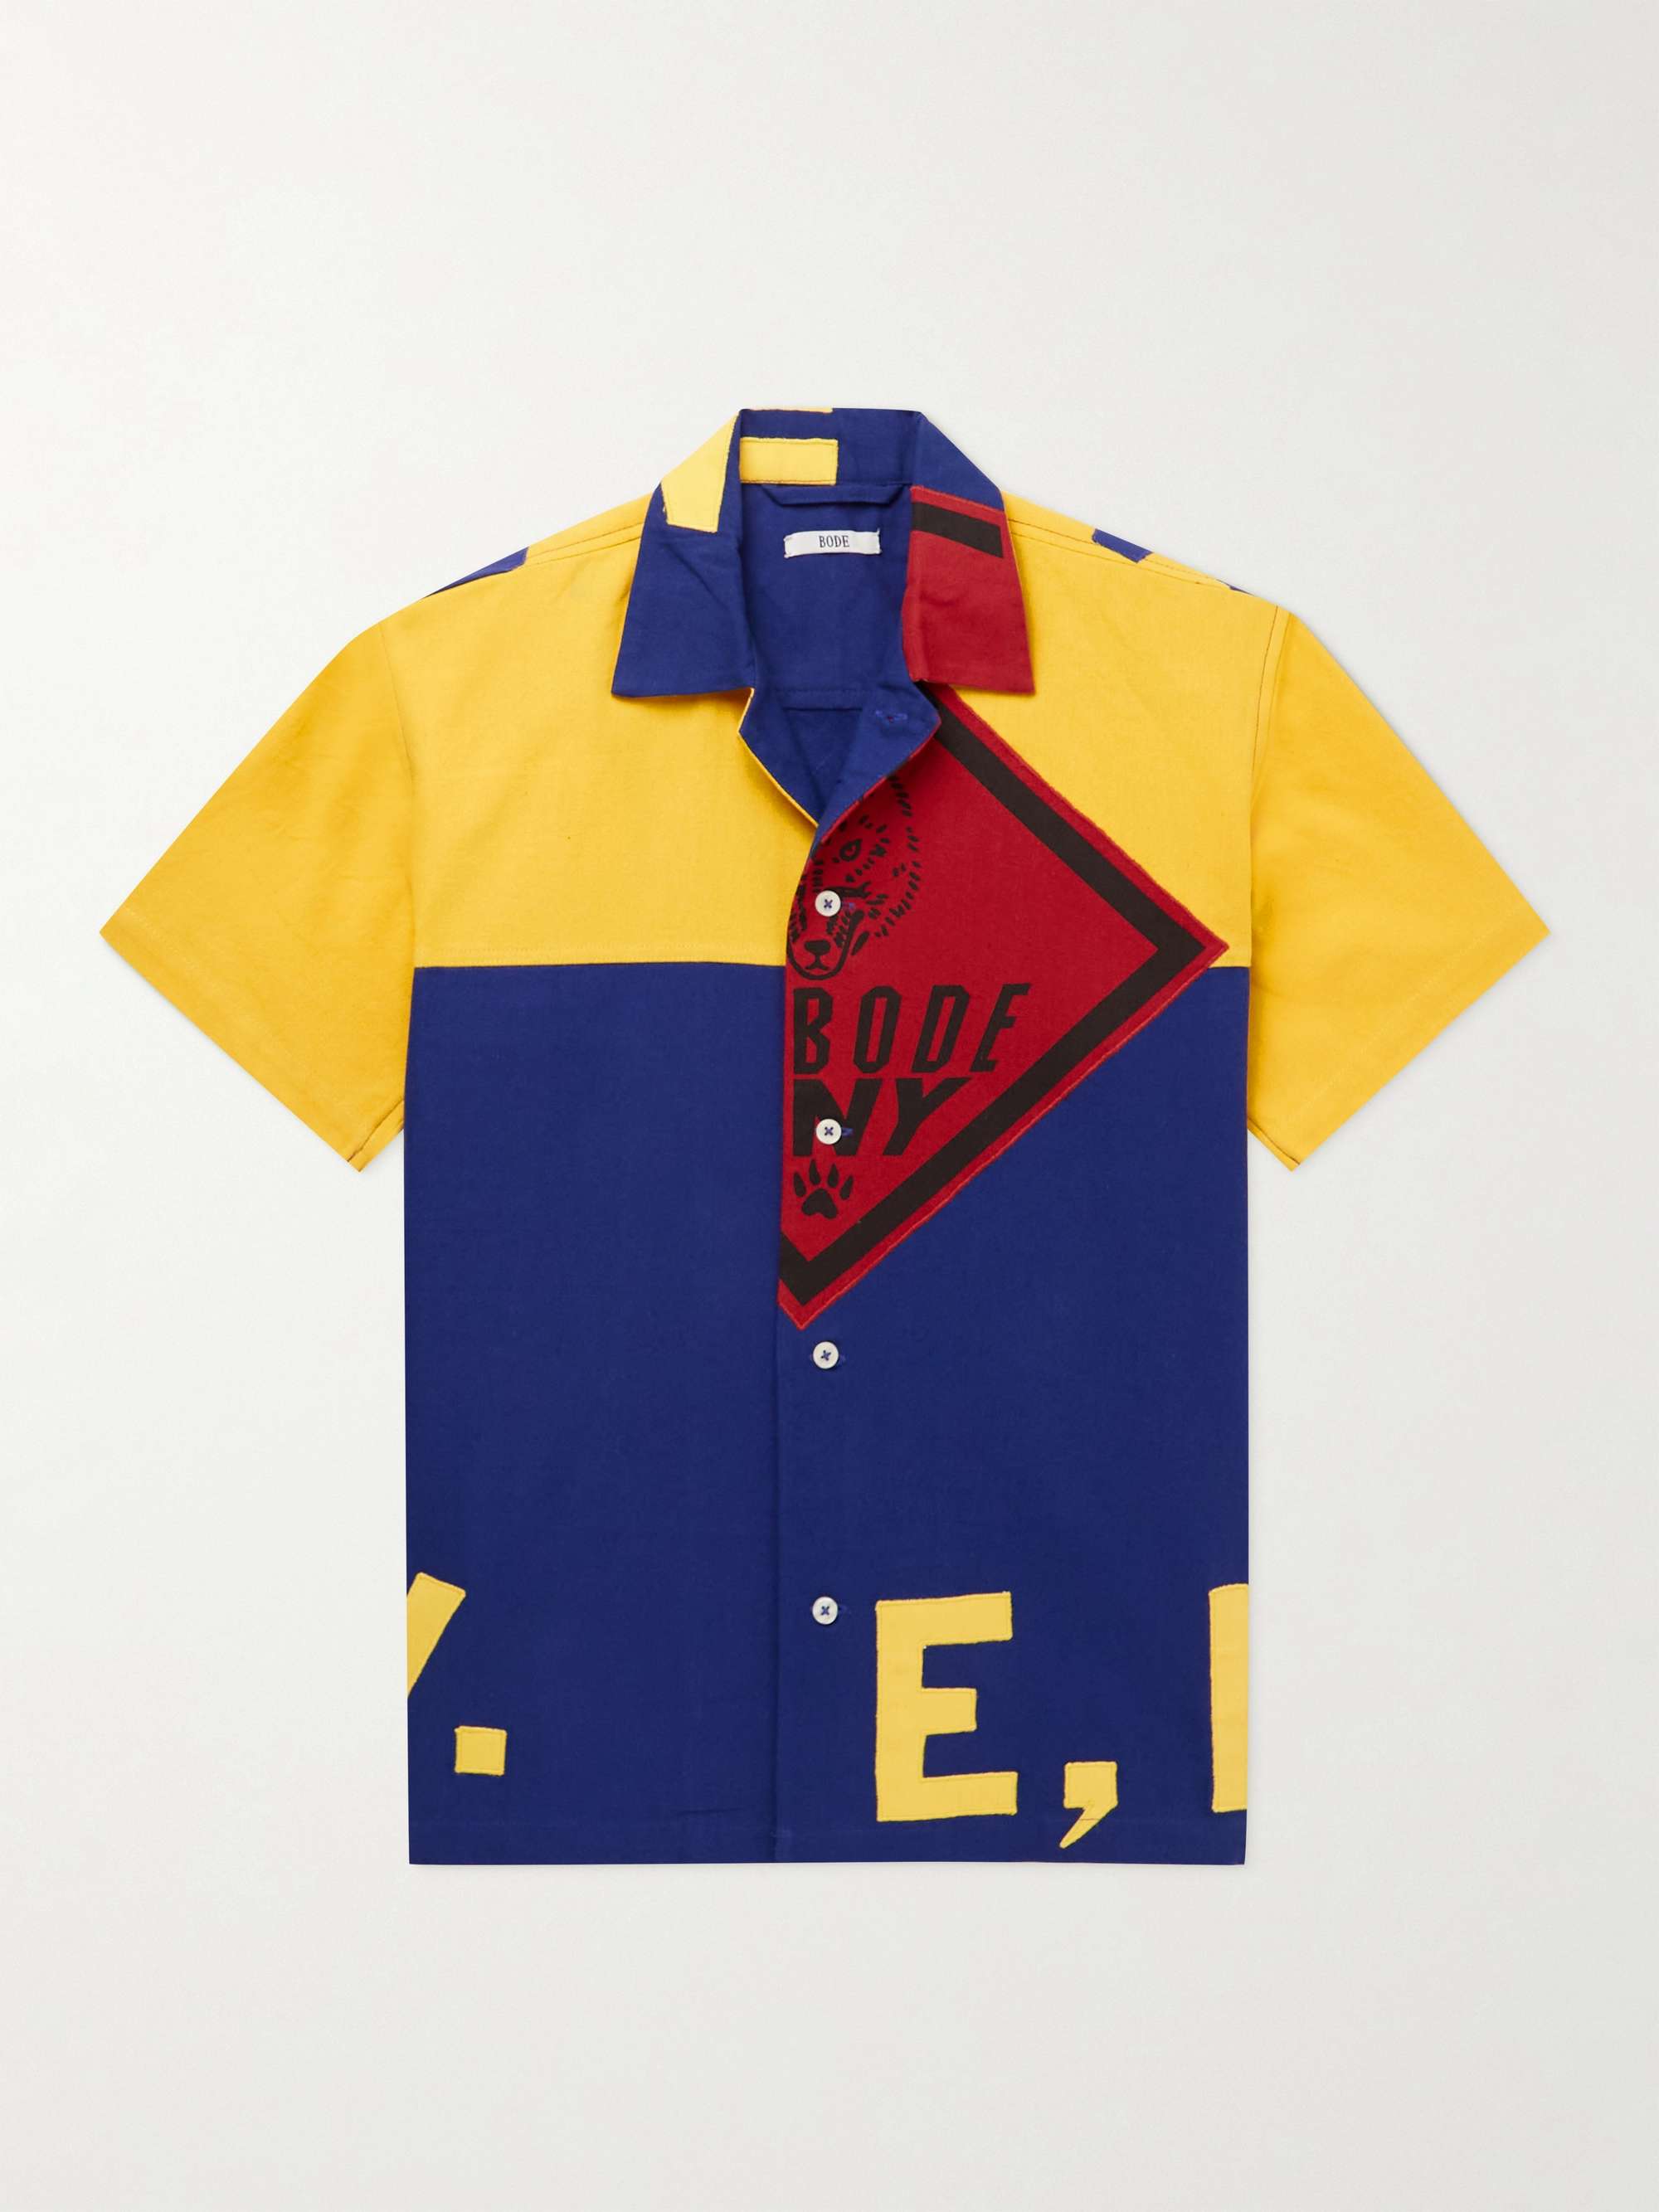 BODE Scout Patchwork Printed Cotton Shirt